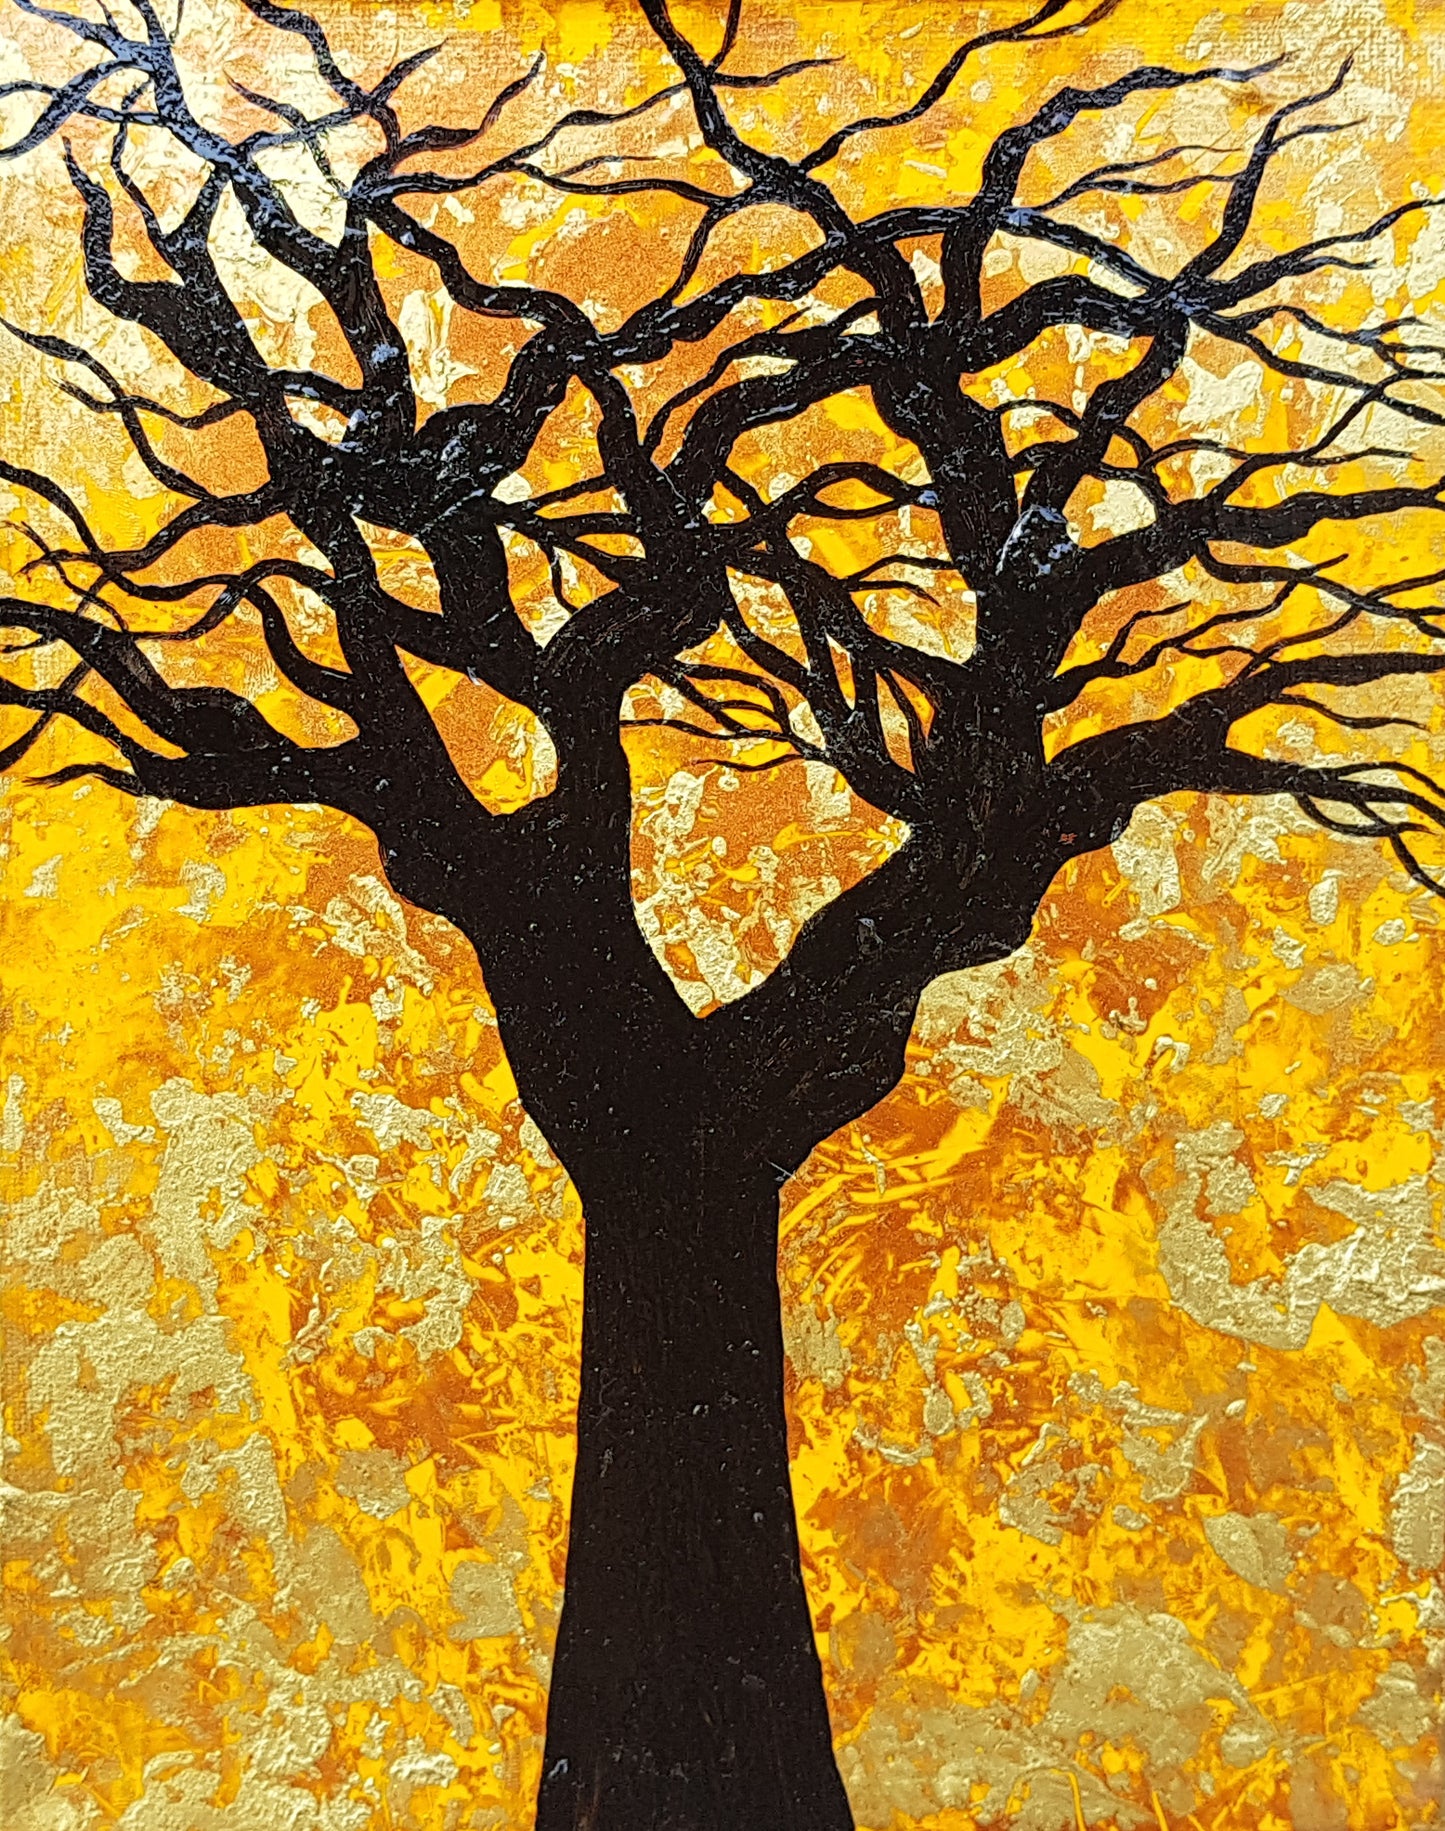 The-Root-of-Evil-by-Alexandra-Romano-Original-Amazing-Tree-Painting-Abstract-Expressionism-Impressionism-Artwork-Yellow-Gold-Black-Copper-Beautiful-Art-Gallery-In-Toronto-Canada-home-decor